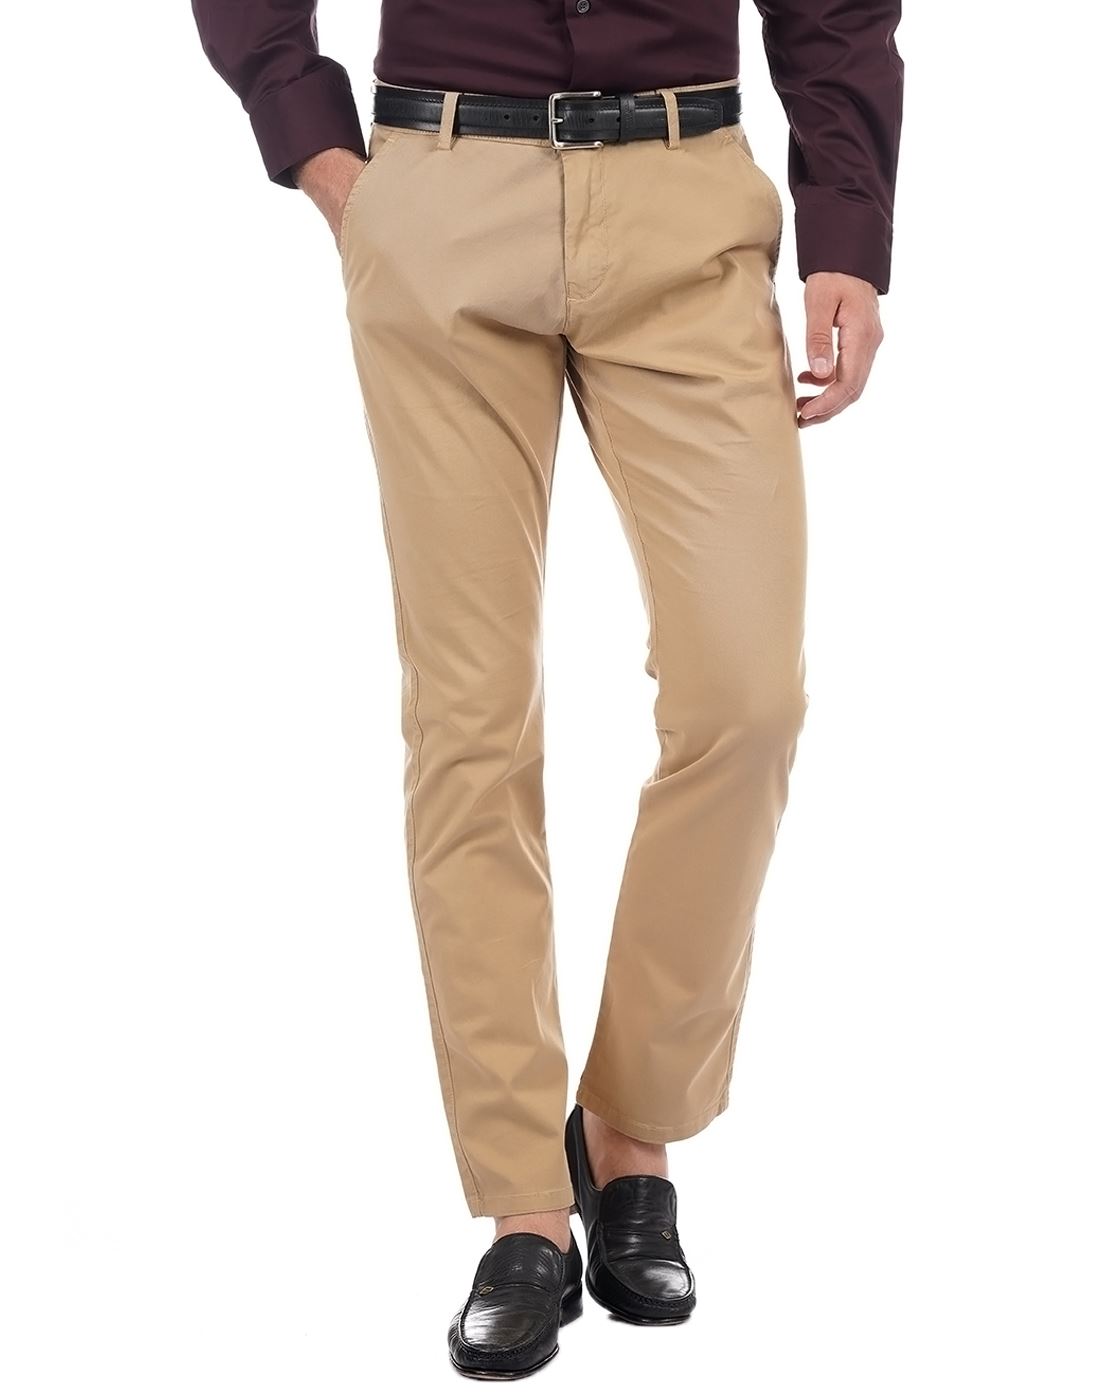 FRENCH CONNECTION  Slim Fit Neutral Trousers  Moss Box